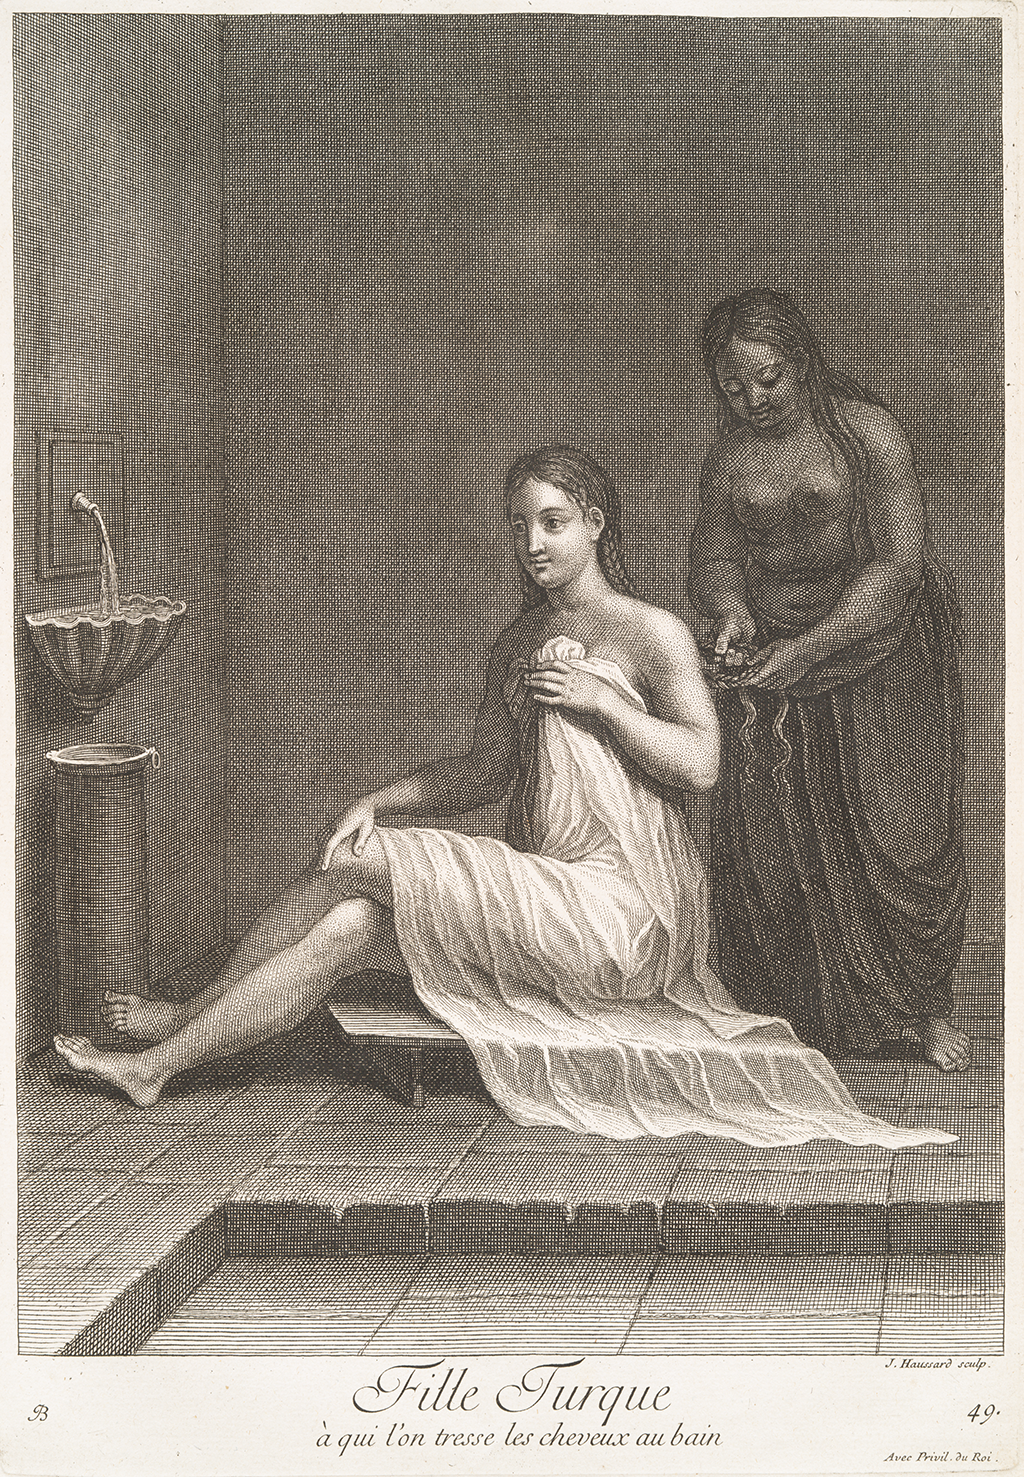 A black and white image of a lightly skinned woman sitting on a small wooden board, she covers herself with a large but loose fabric. Behind her is a darker skinned woman holding the lightly skinned woman’s hair. On the wall to the left, there is a stink with water pouring from a faucet. The text at the bottom says &ldquo;Fille Turque a qui l’on tresse les cheveux au bain.&rdquo;